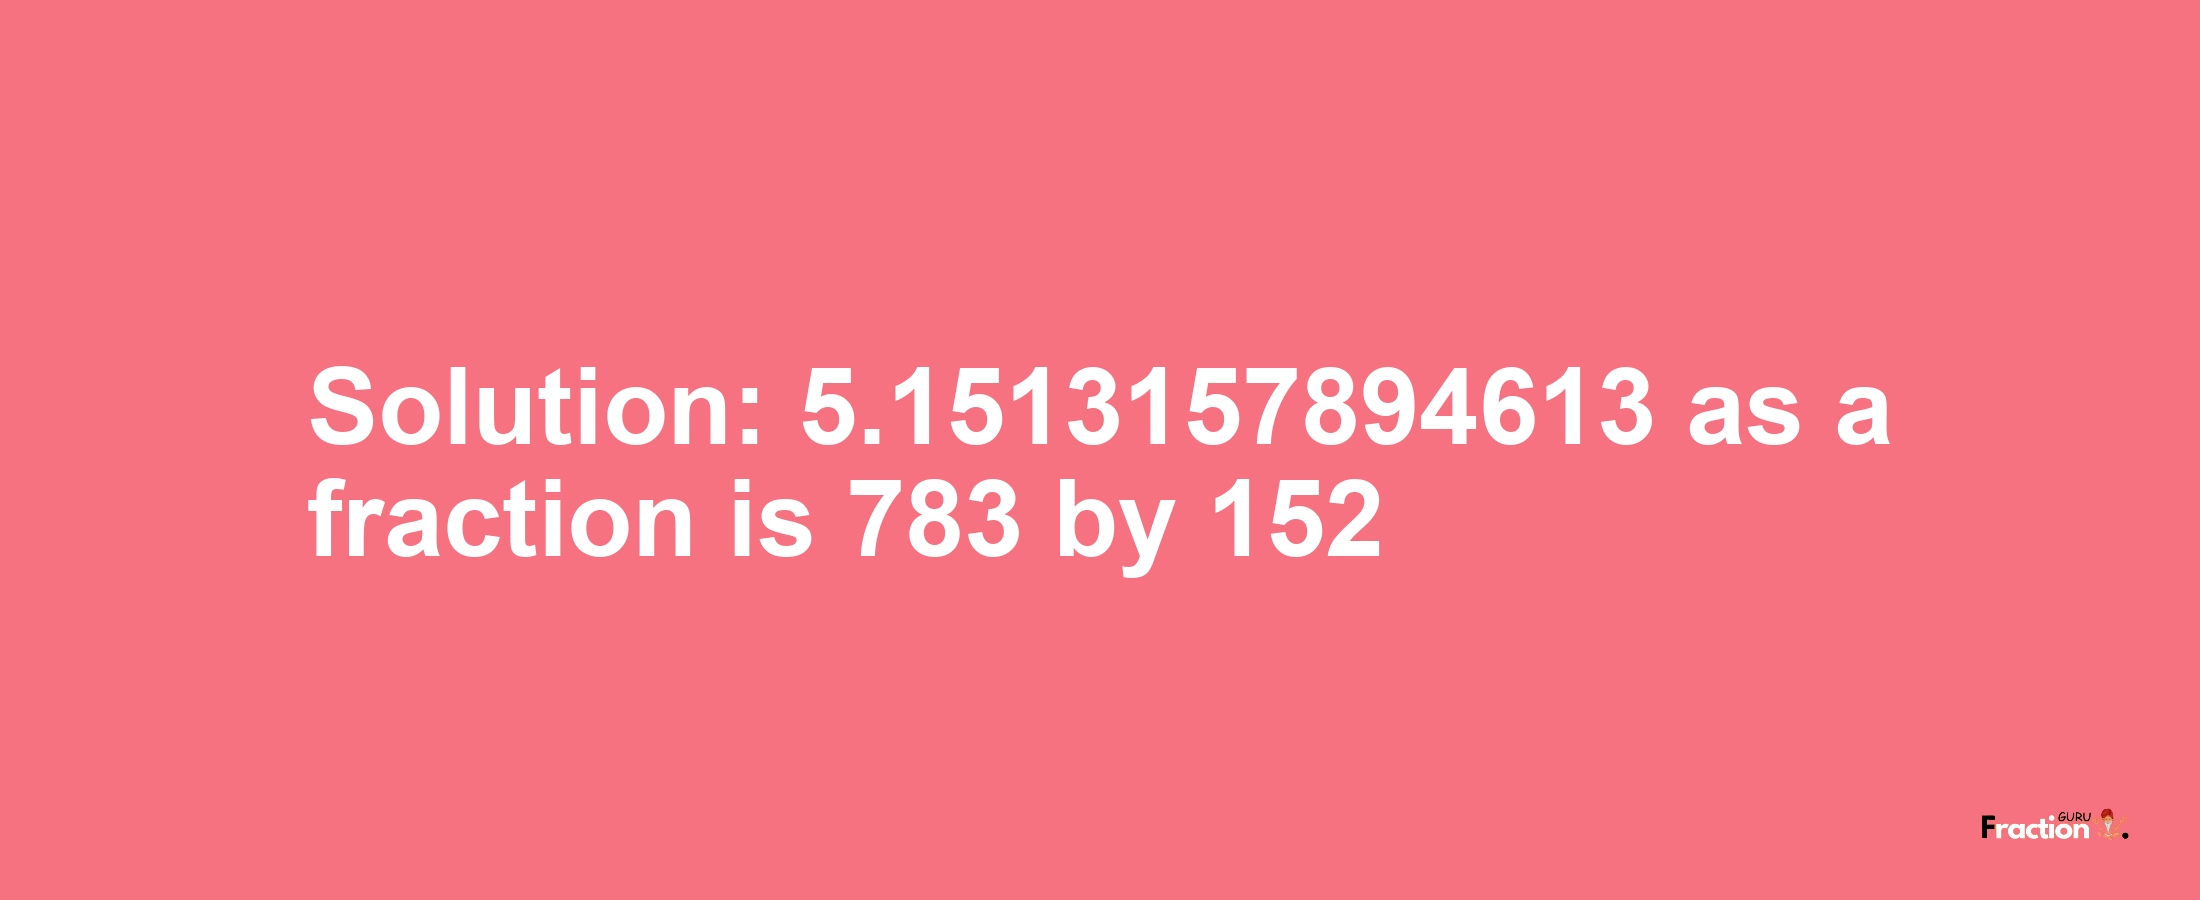 Solution:5.1513157894613 as a fraction is 783/152